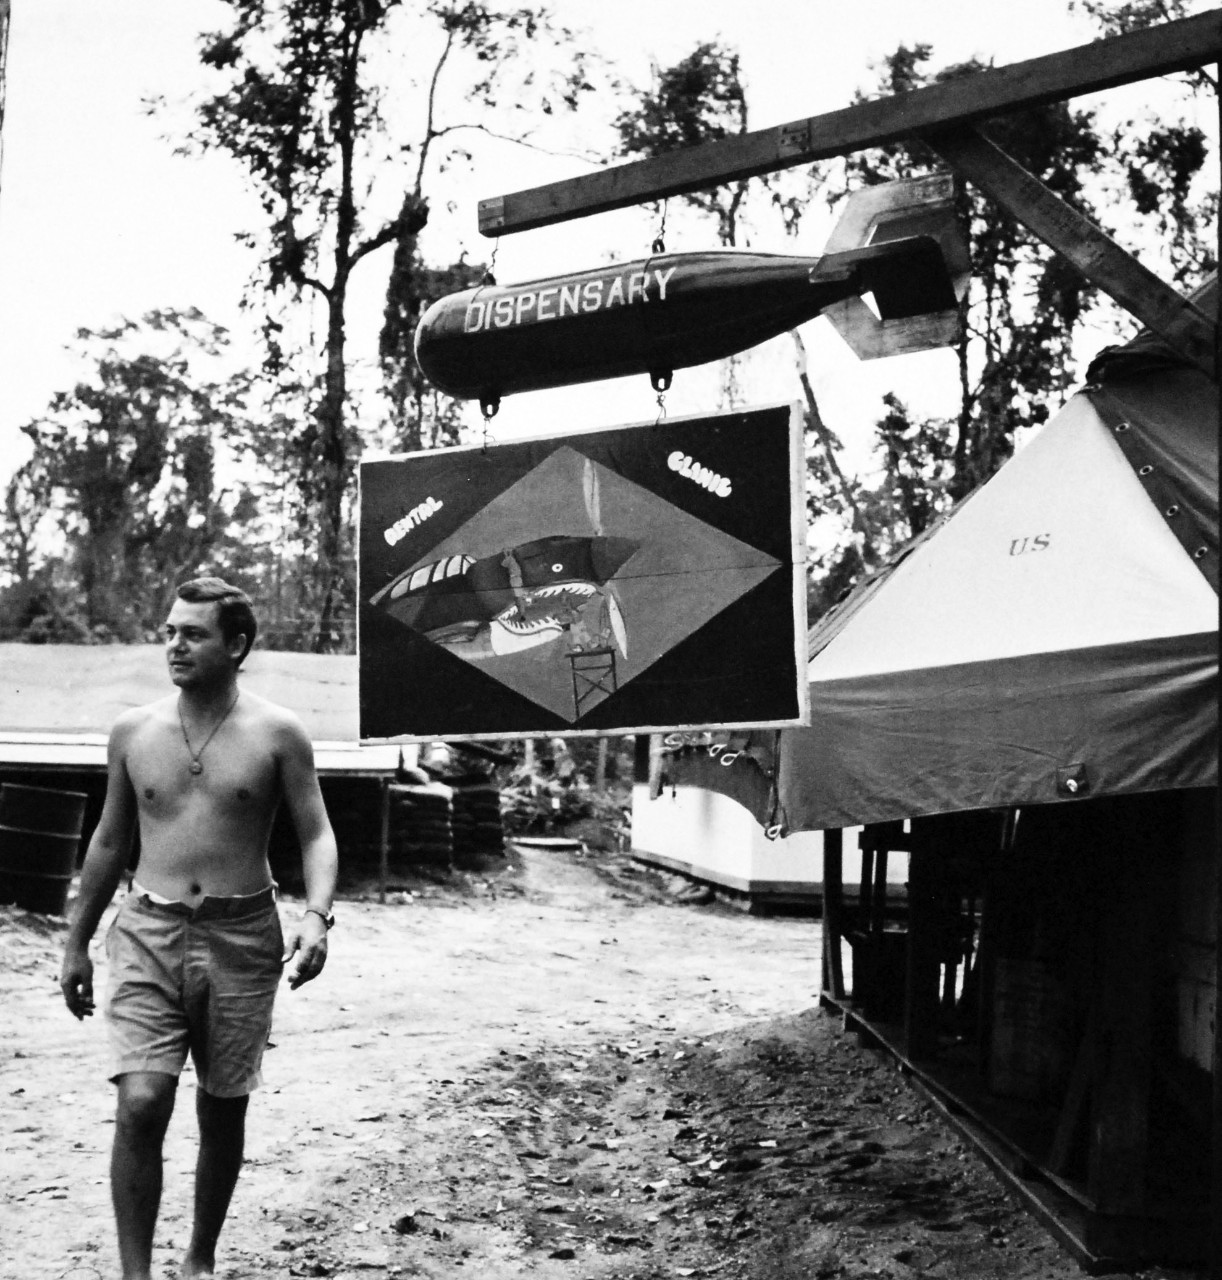 80-G-409035:  Bougainville Campaign, November 1943-August 1945.  As though prospect of the dentist wasn’t bad enough anyway, this sign is hung at the Dental Clinic at Bougainville.  The placard suspended from the water bomb depicts oral surgery being performed on a shark-nosed P-40 Army fighter.   Steichen Photograph crew, TR-9441, February 1944.   Official U.S Navy   Photograph, now in the collections of the National Archives.  (2017/12/13).